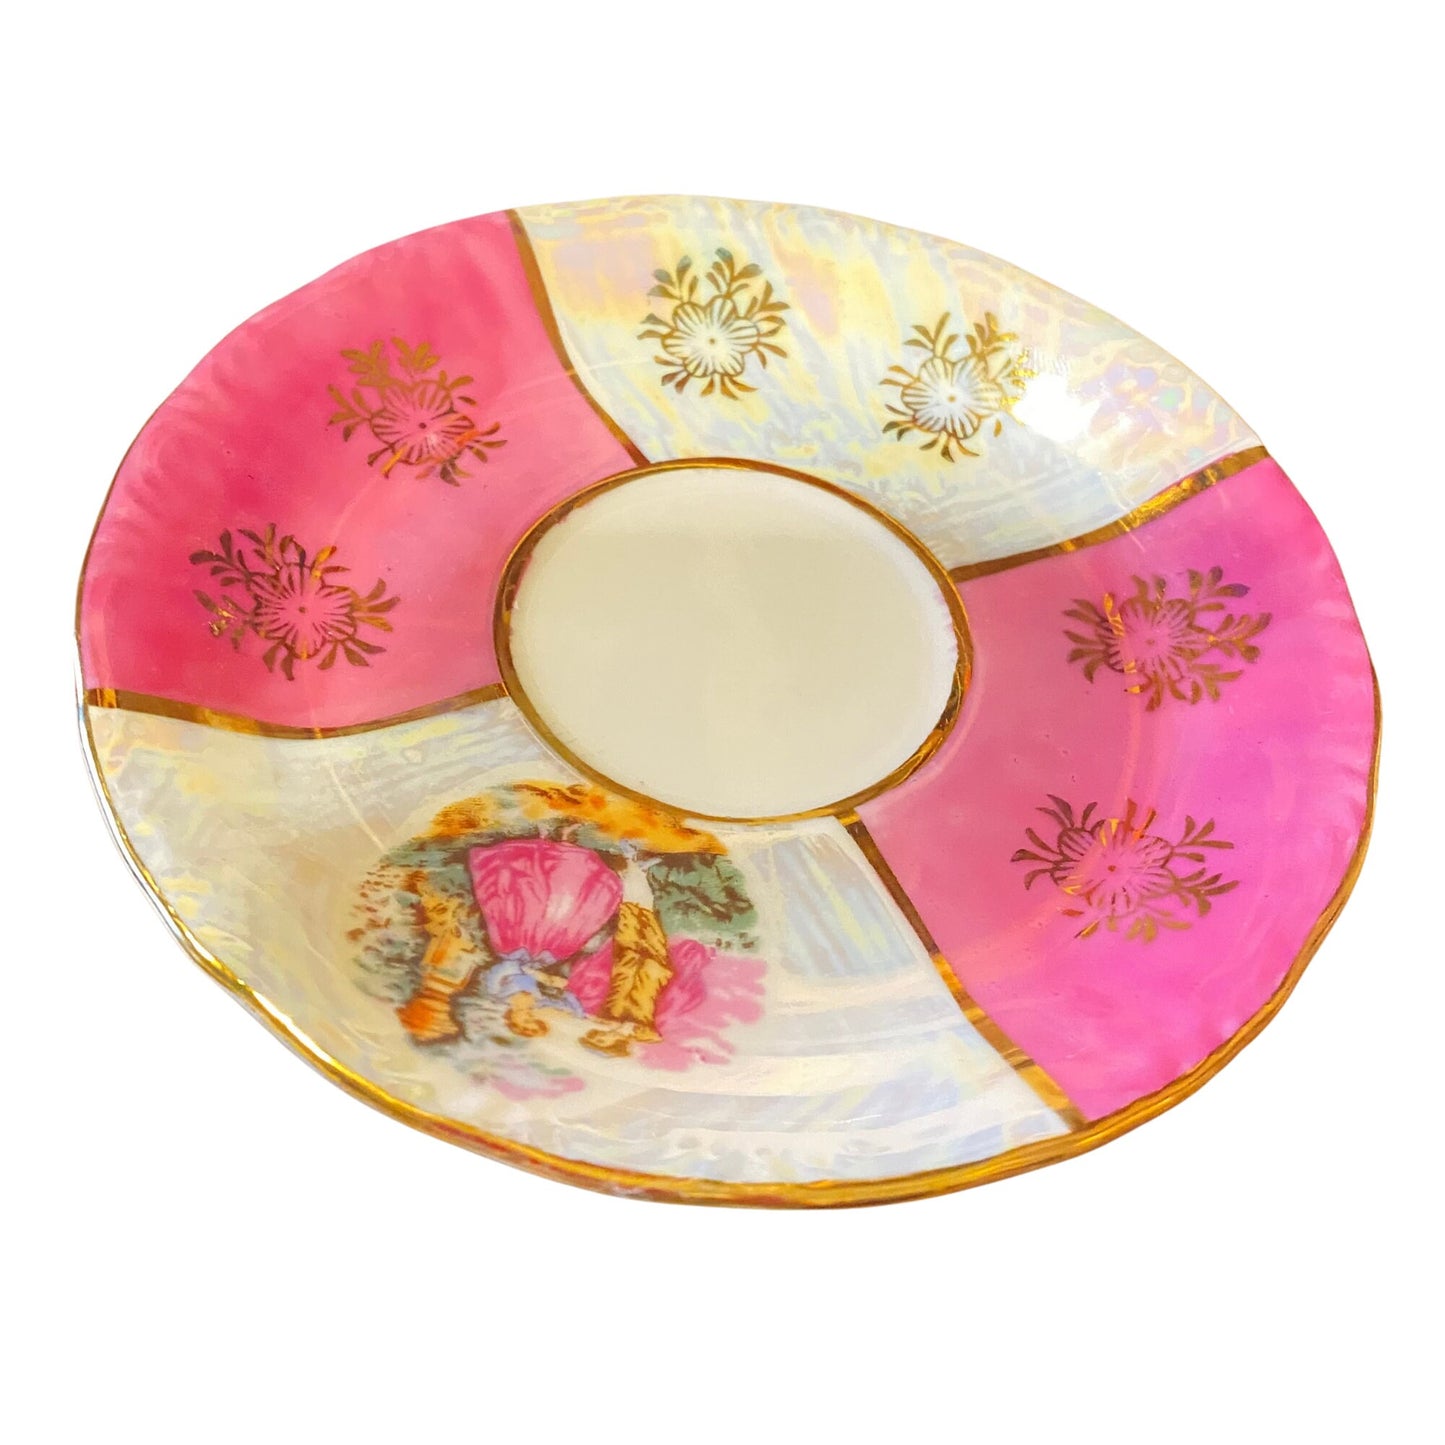 Pink & Pearl Polka Lusterware miniature, with Fragonard Lovers, golden filigree flowers and finishing touches - Chinamania.shop